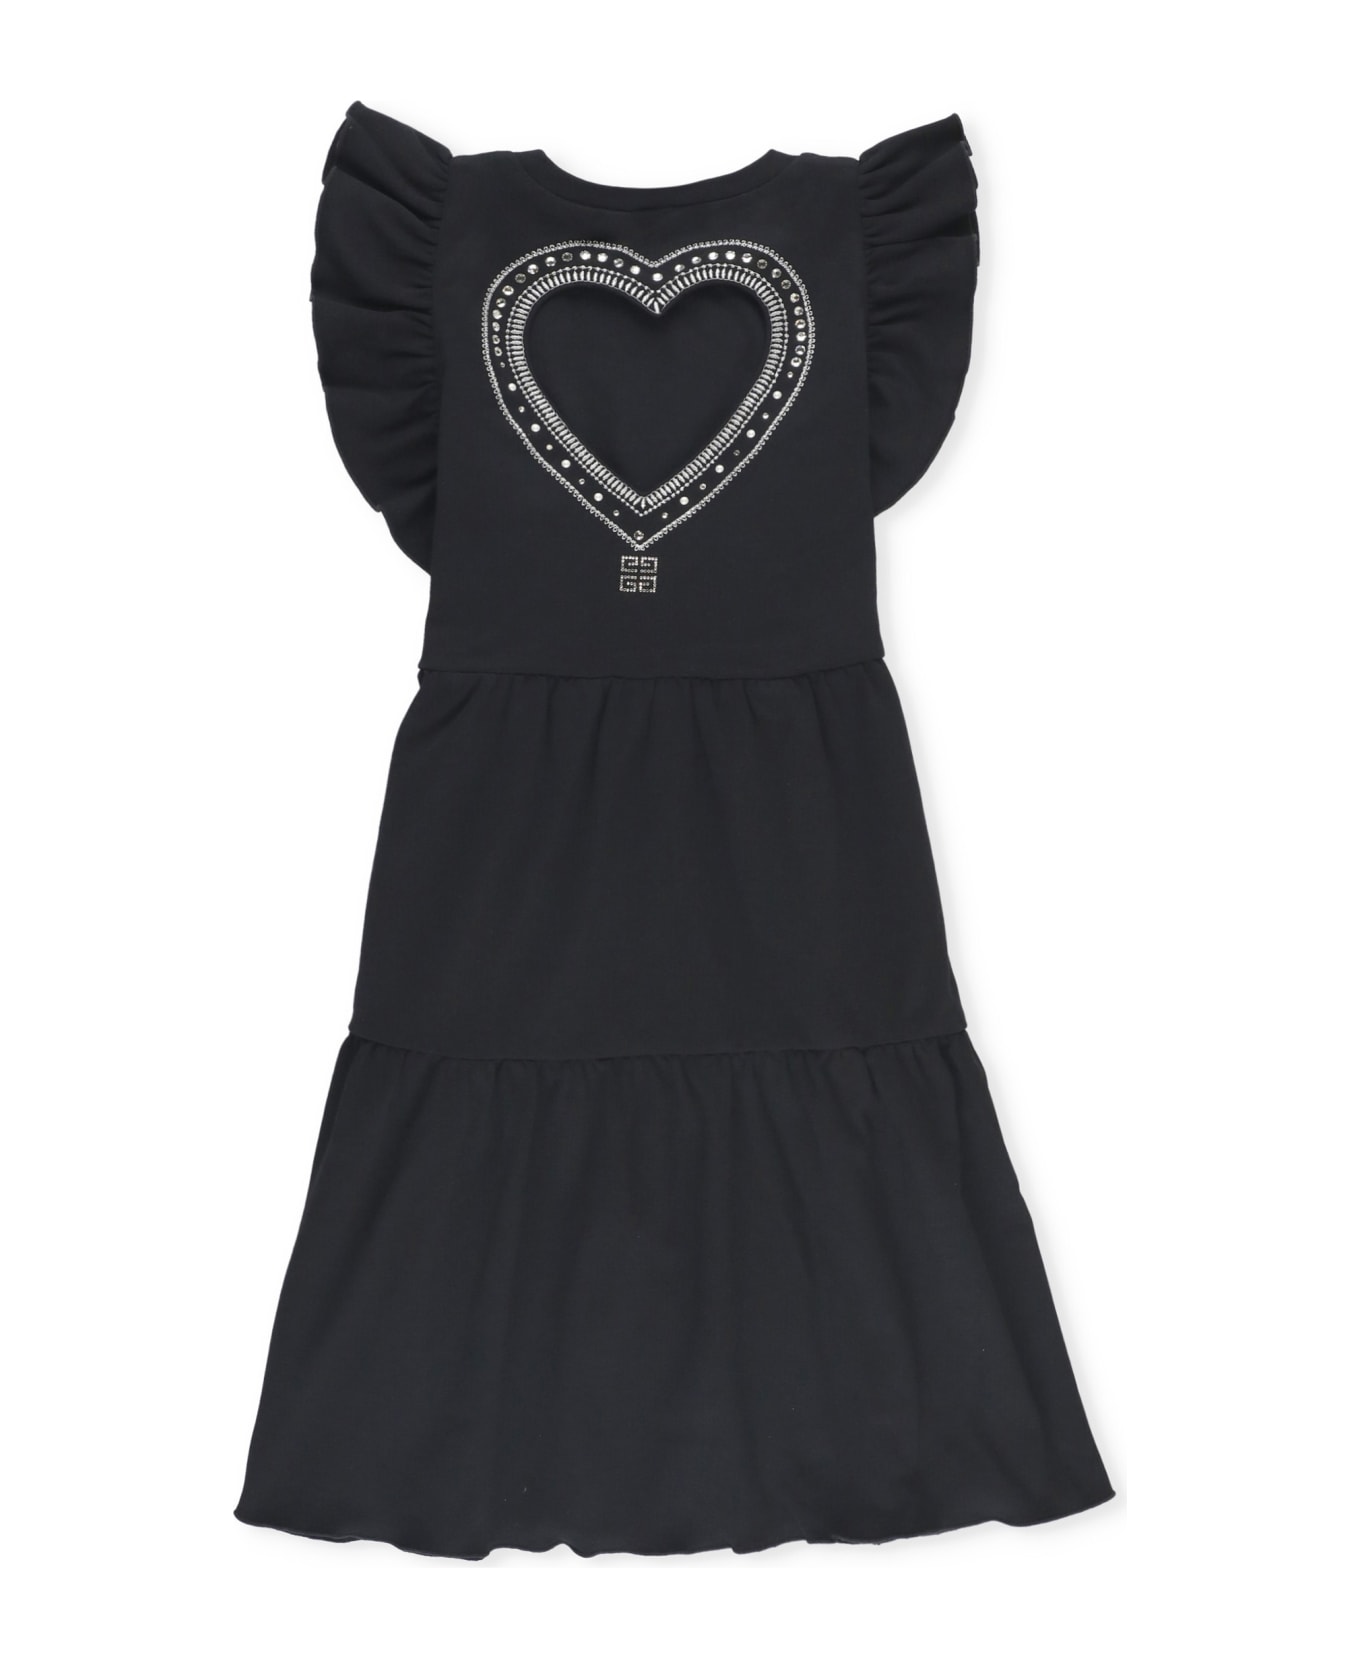 Givenchy Dress With Logo - Black